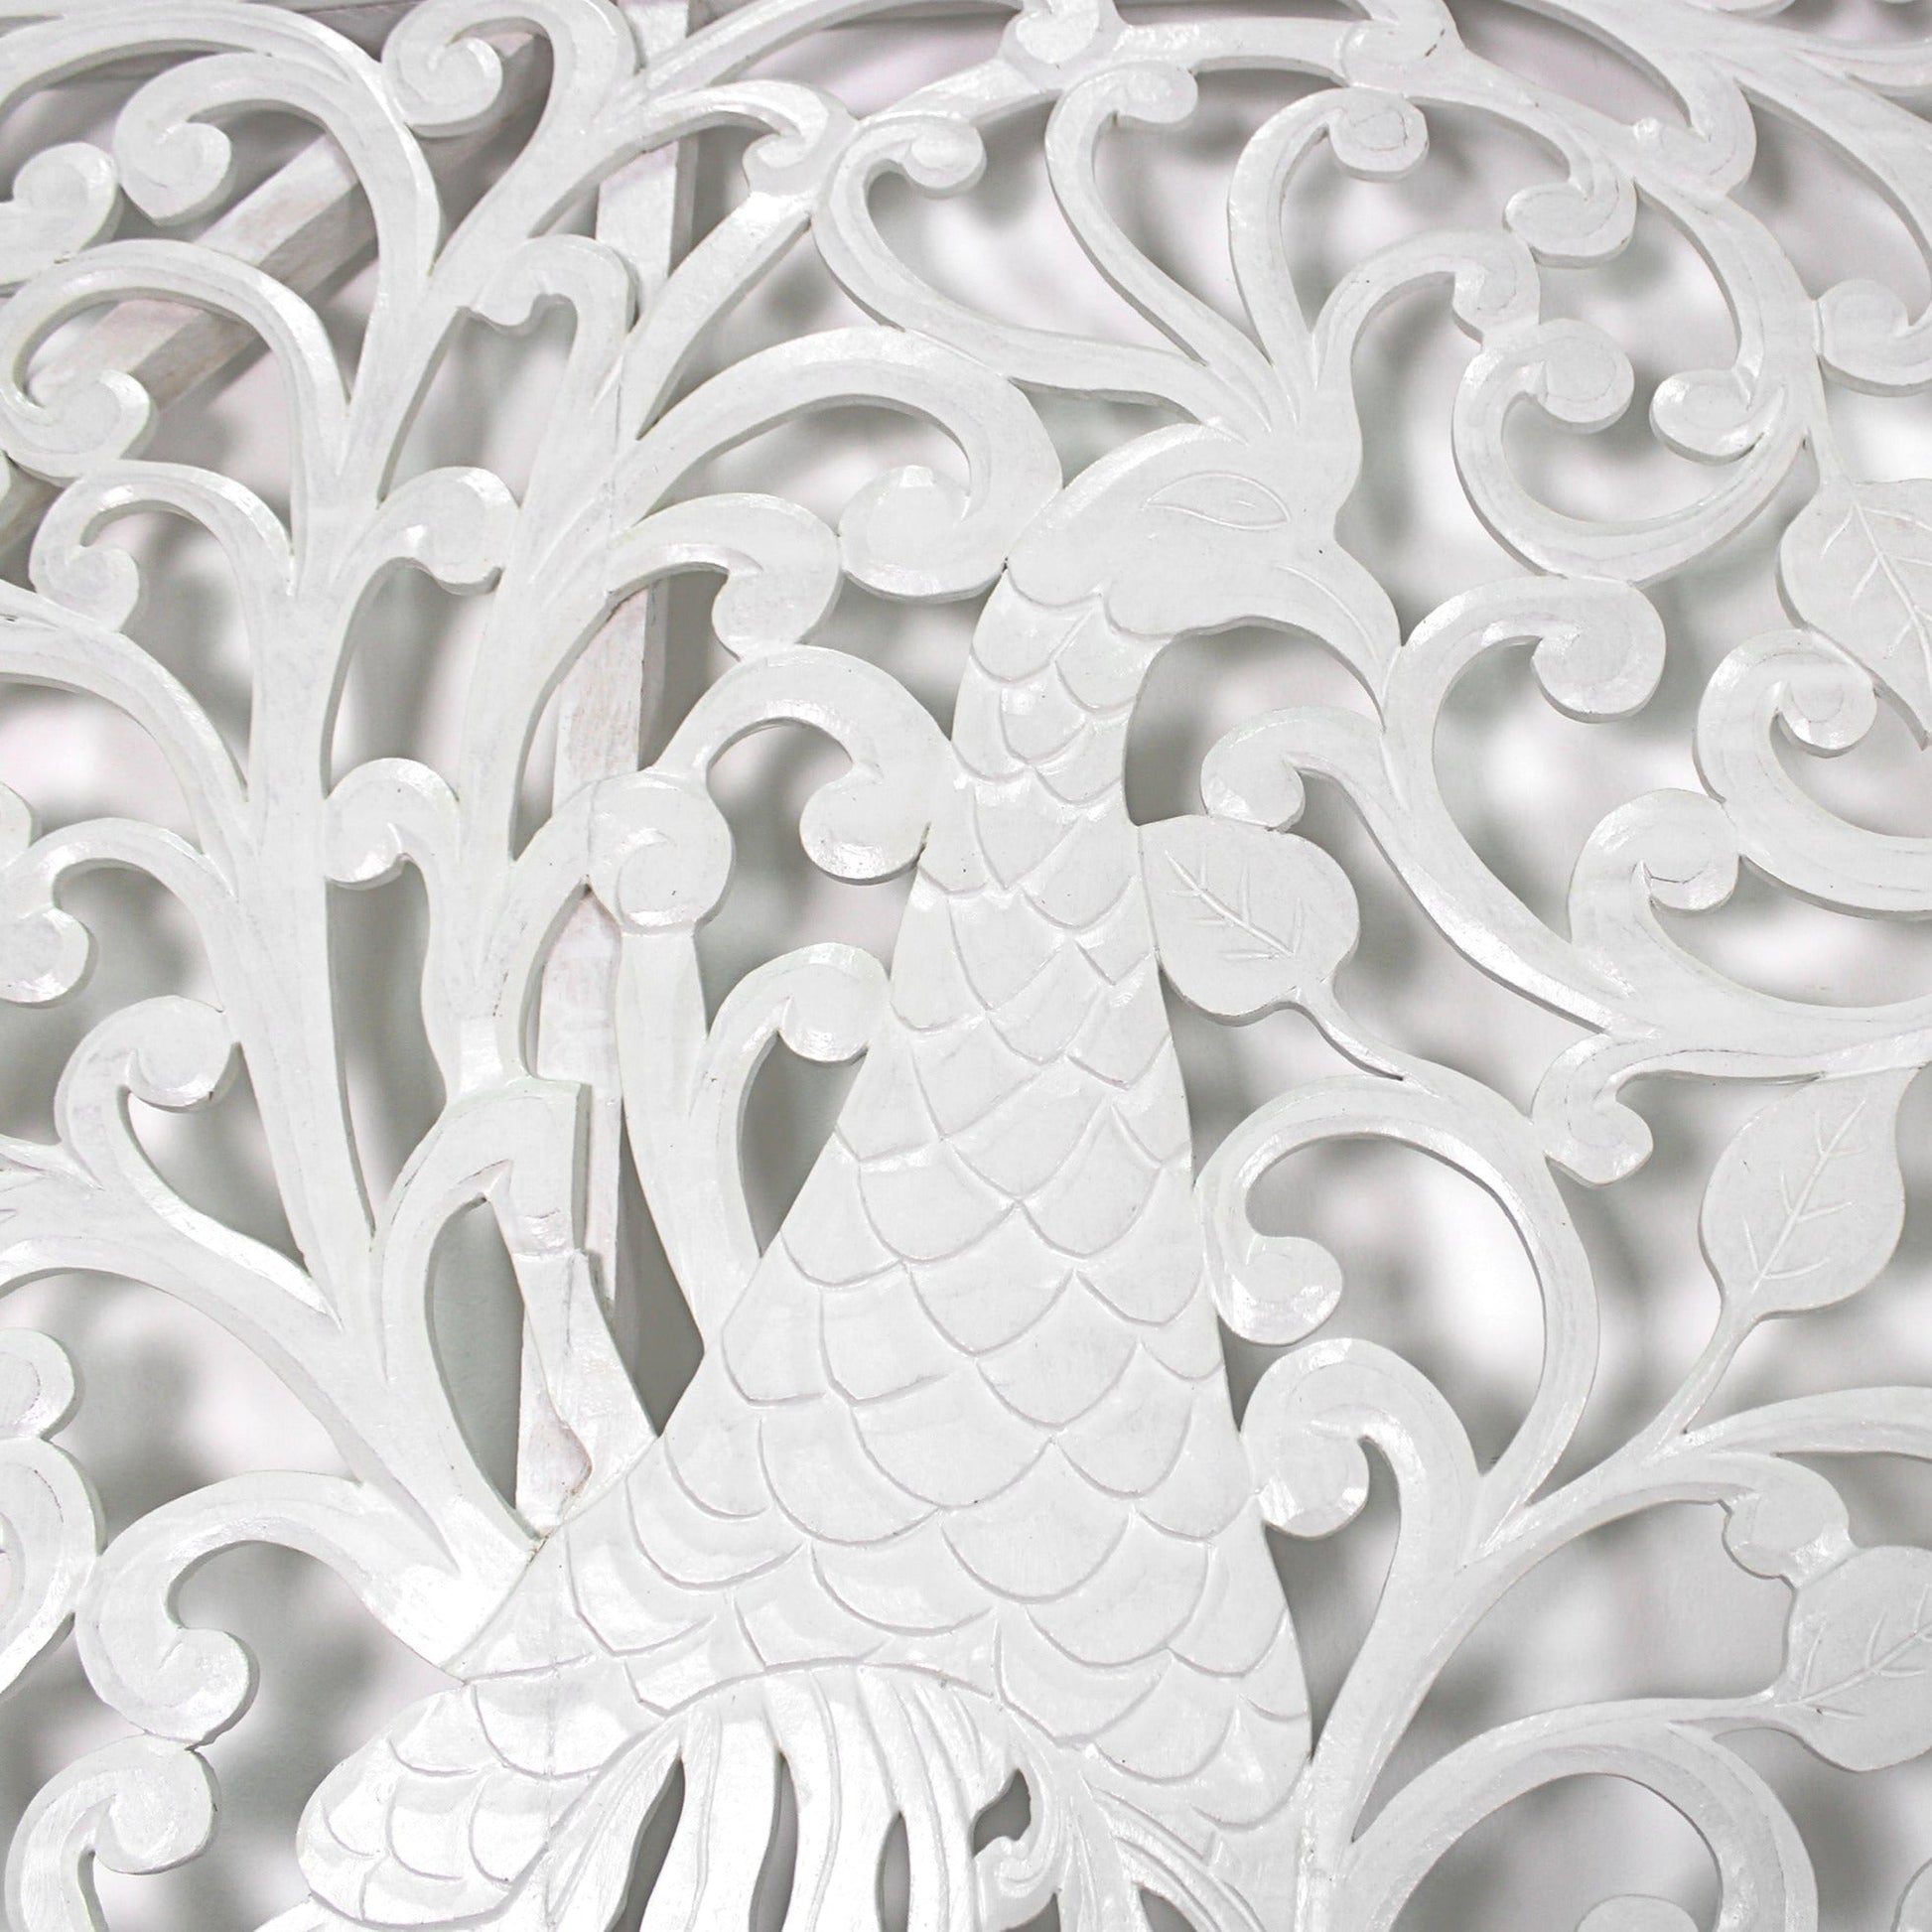 decorative panel peacock white wash bali design hand carved hand made decorative house furniture wood material decorative wall panels decorative wood panels decorative panel board